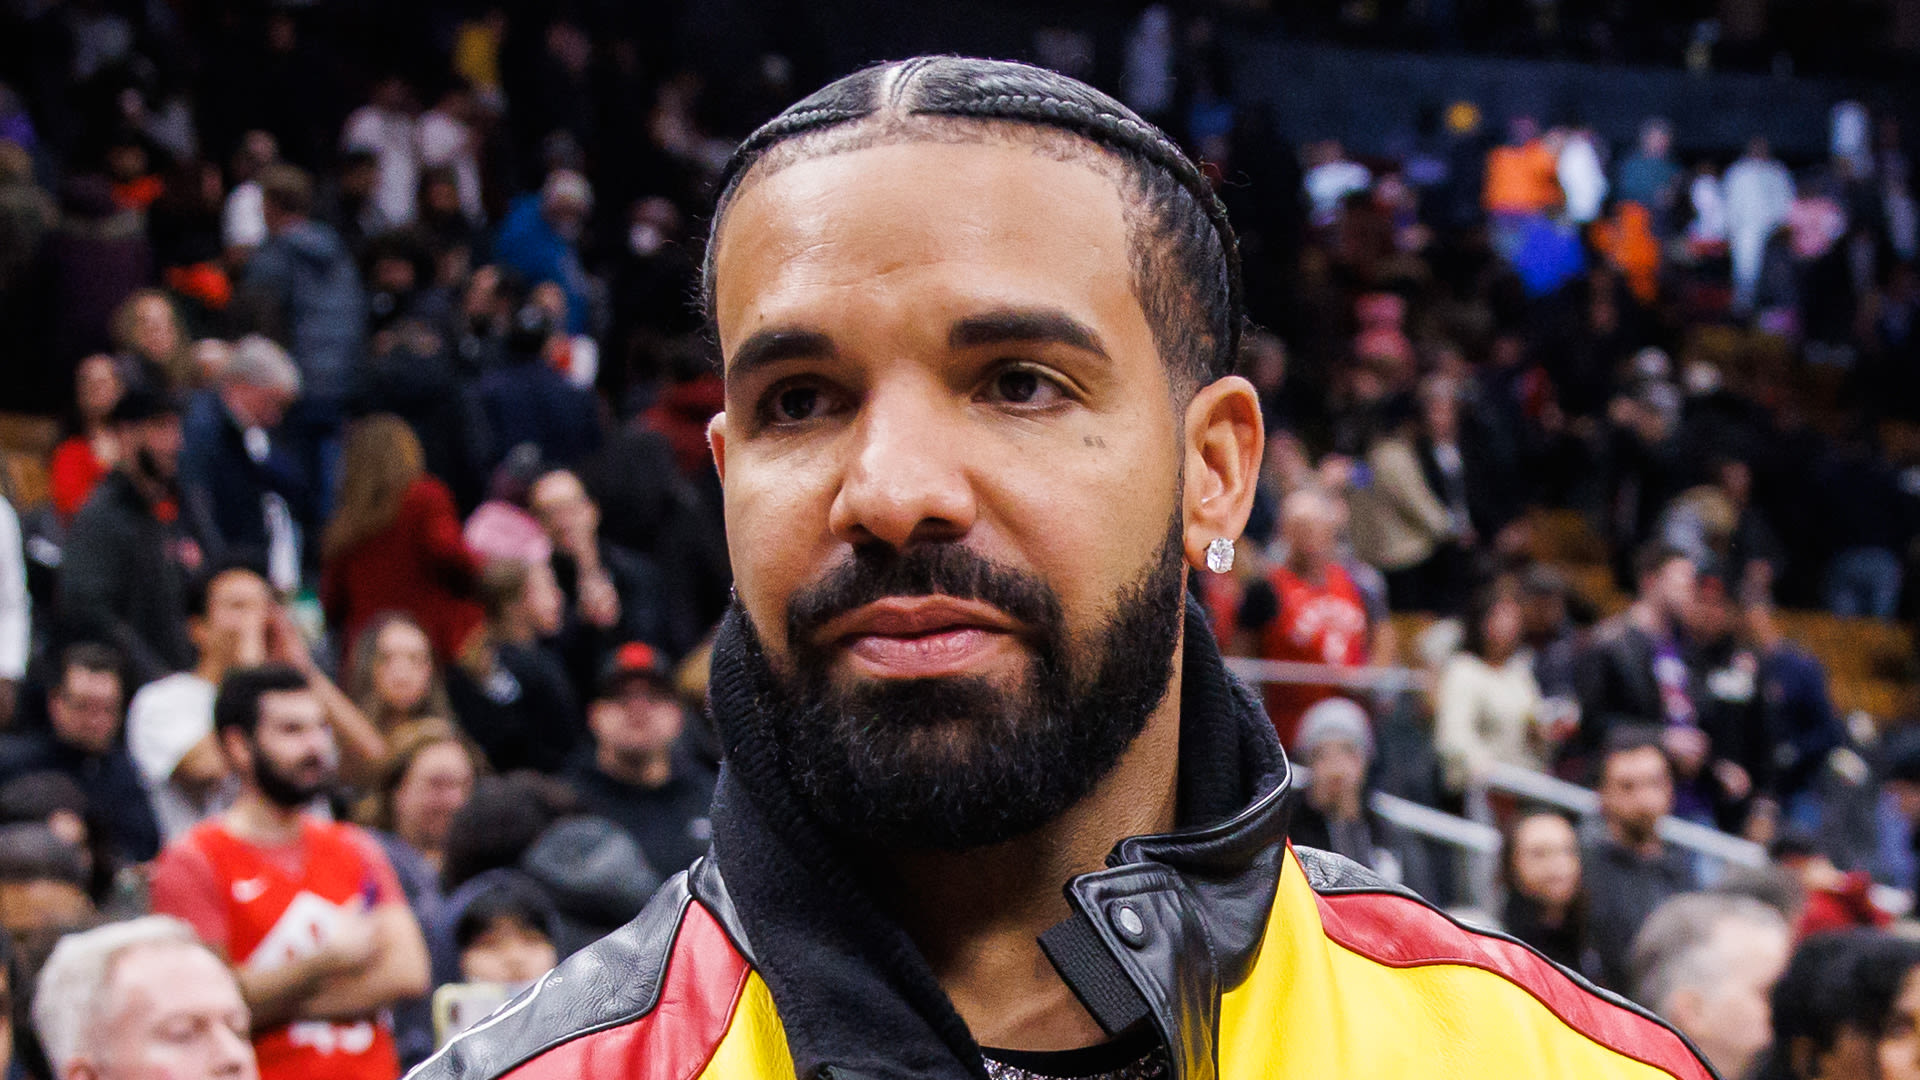 Drake's security take down 3rd mansion intruder as rapper steps up protection